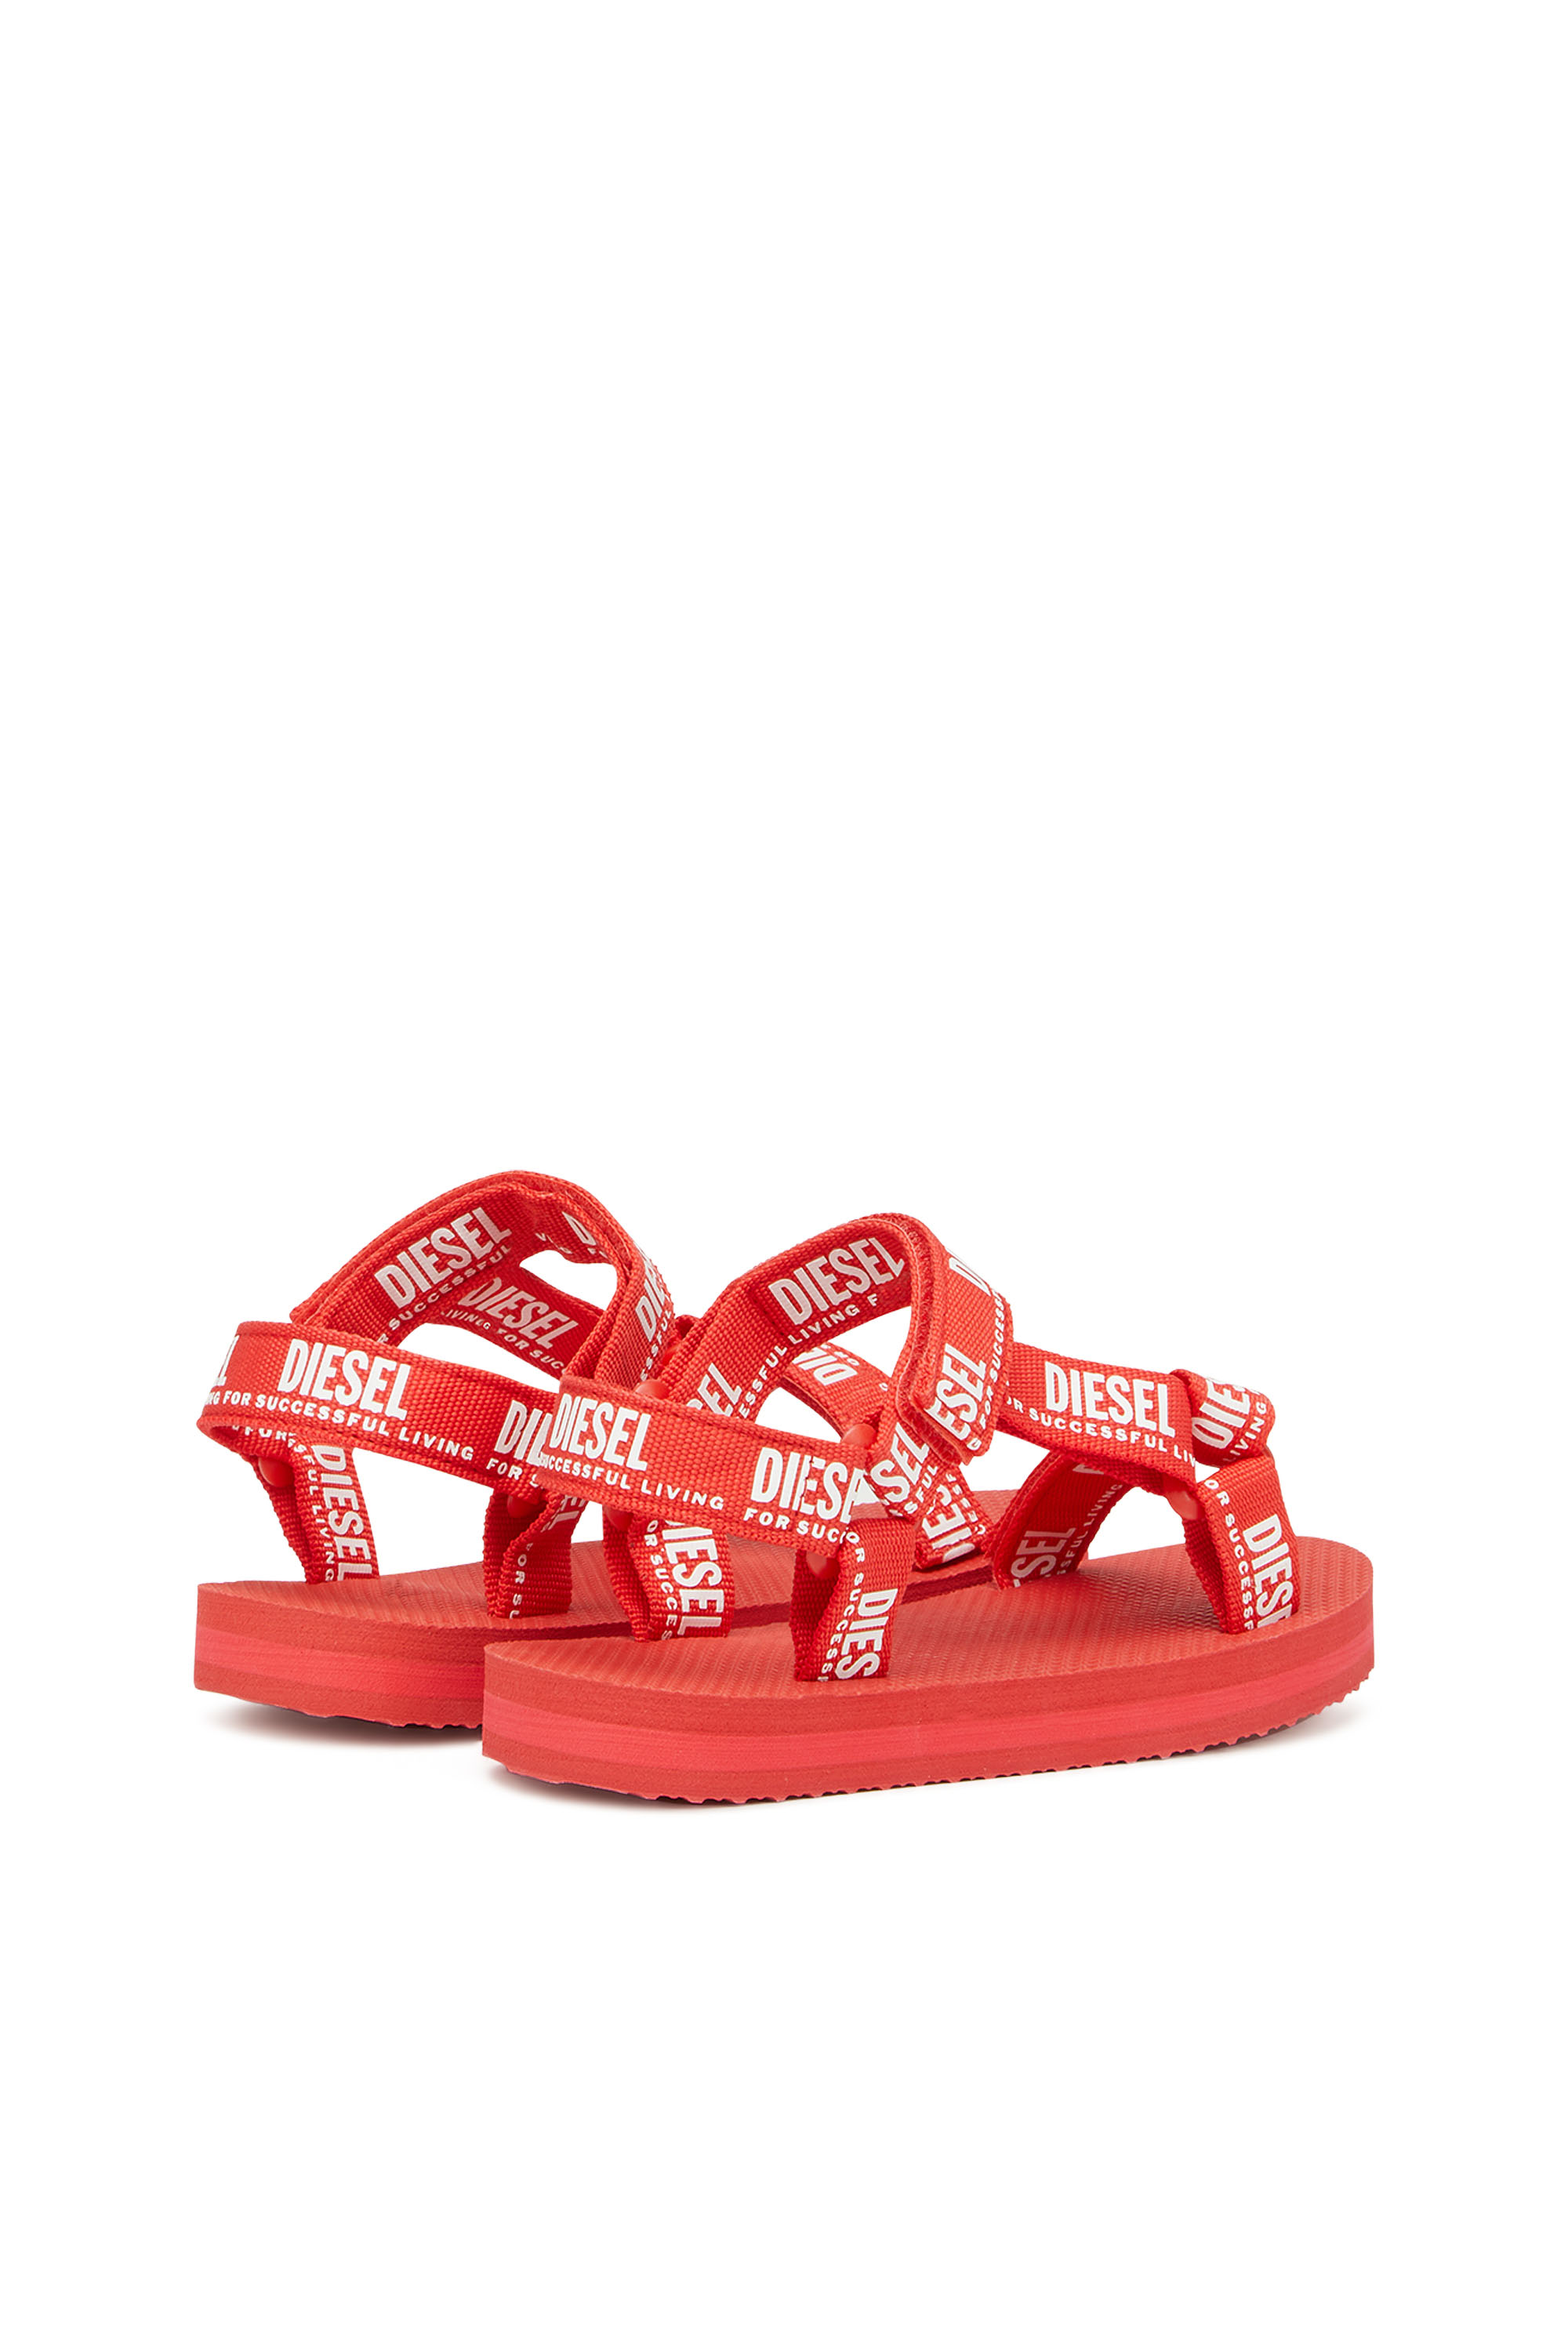 Diesel - S-ANDAL T, Red - Image 3